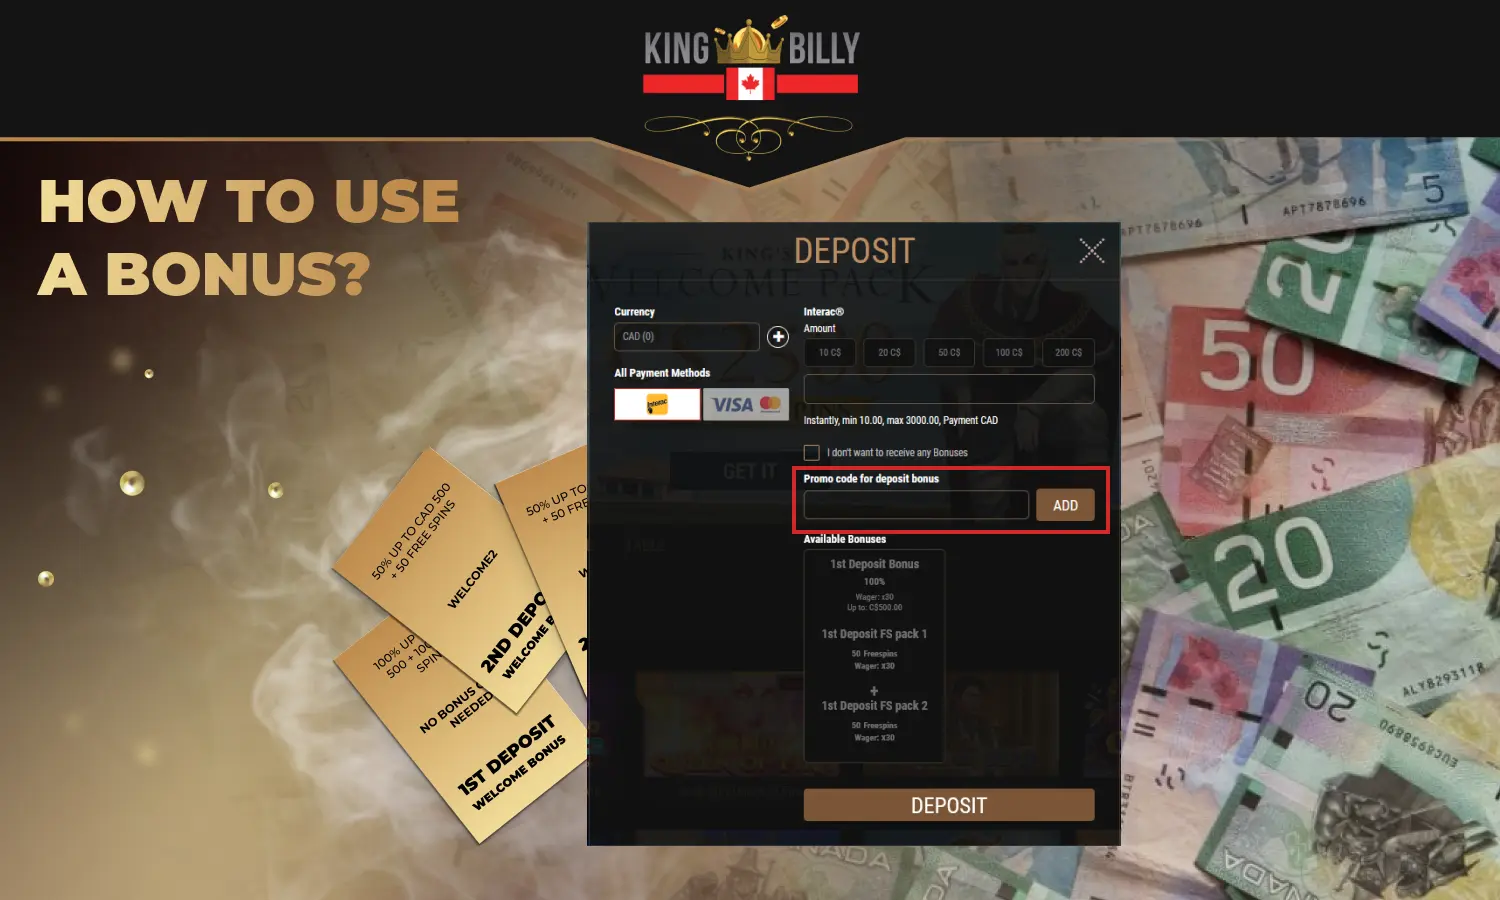 New canadian users of King Billy Casino can easily use hassle-free sign-up bonus